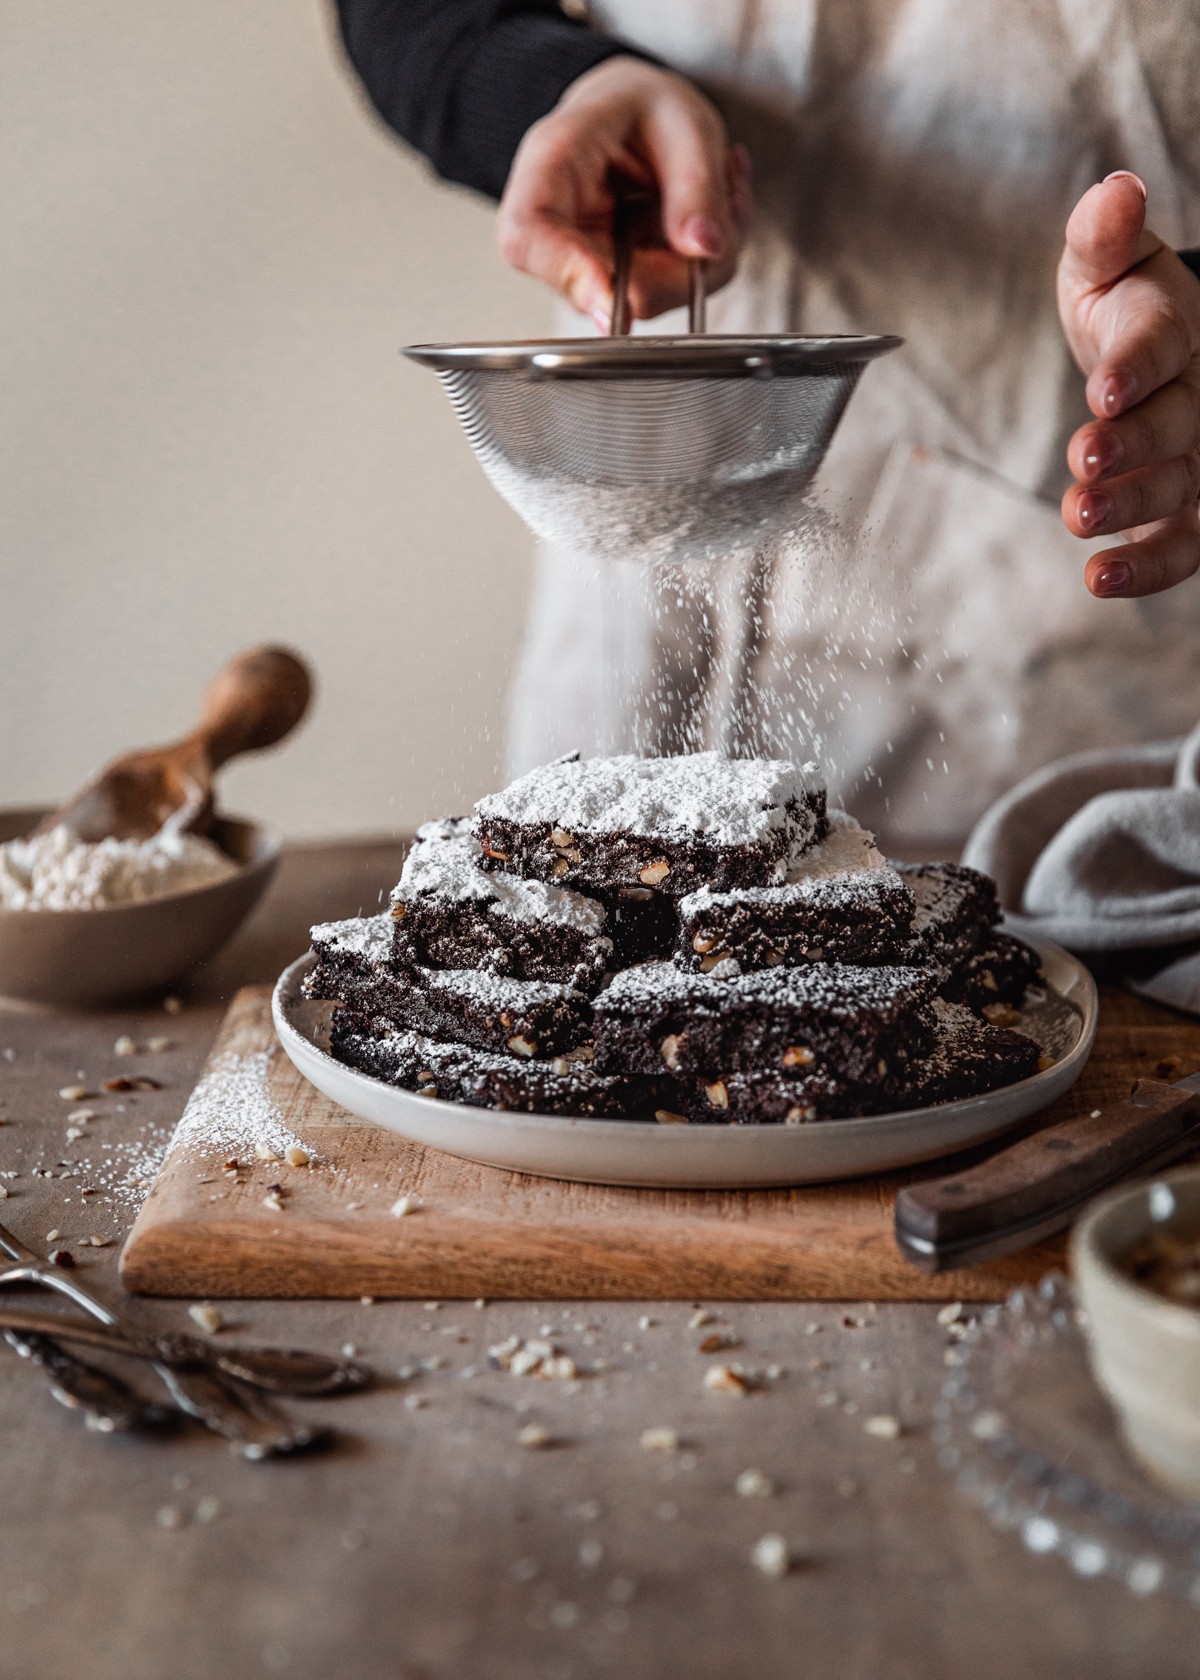 A side image of a white plate of 15-minute brownies on a wood board on a brown counter next to a knife, beige linen, and brown bowl of flour. In the background, a woman wearing a beige linen is dusting powdered sugar over the brownies.